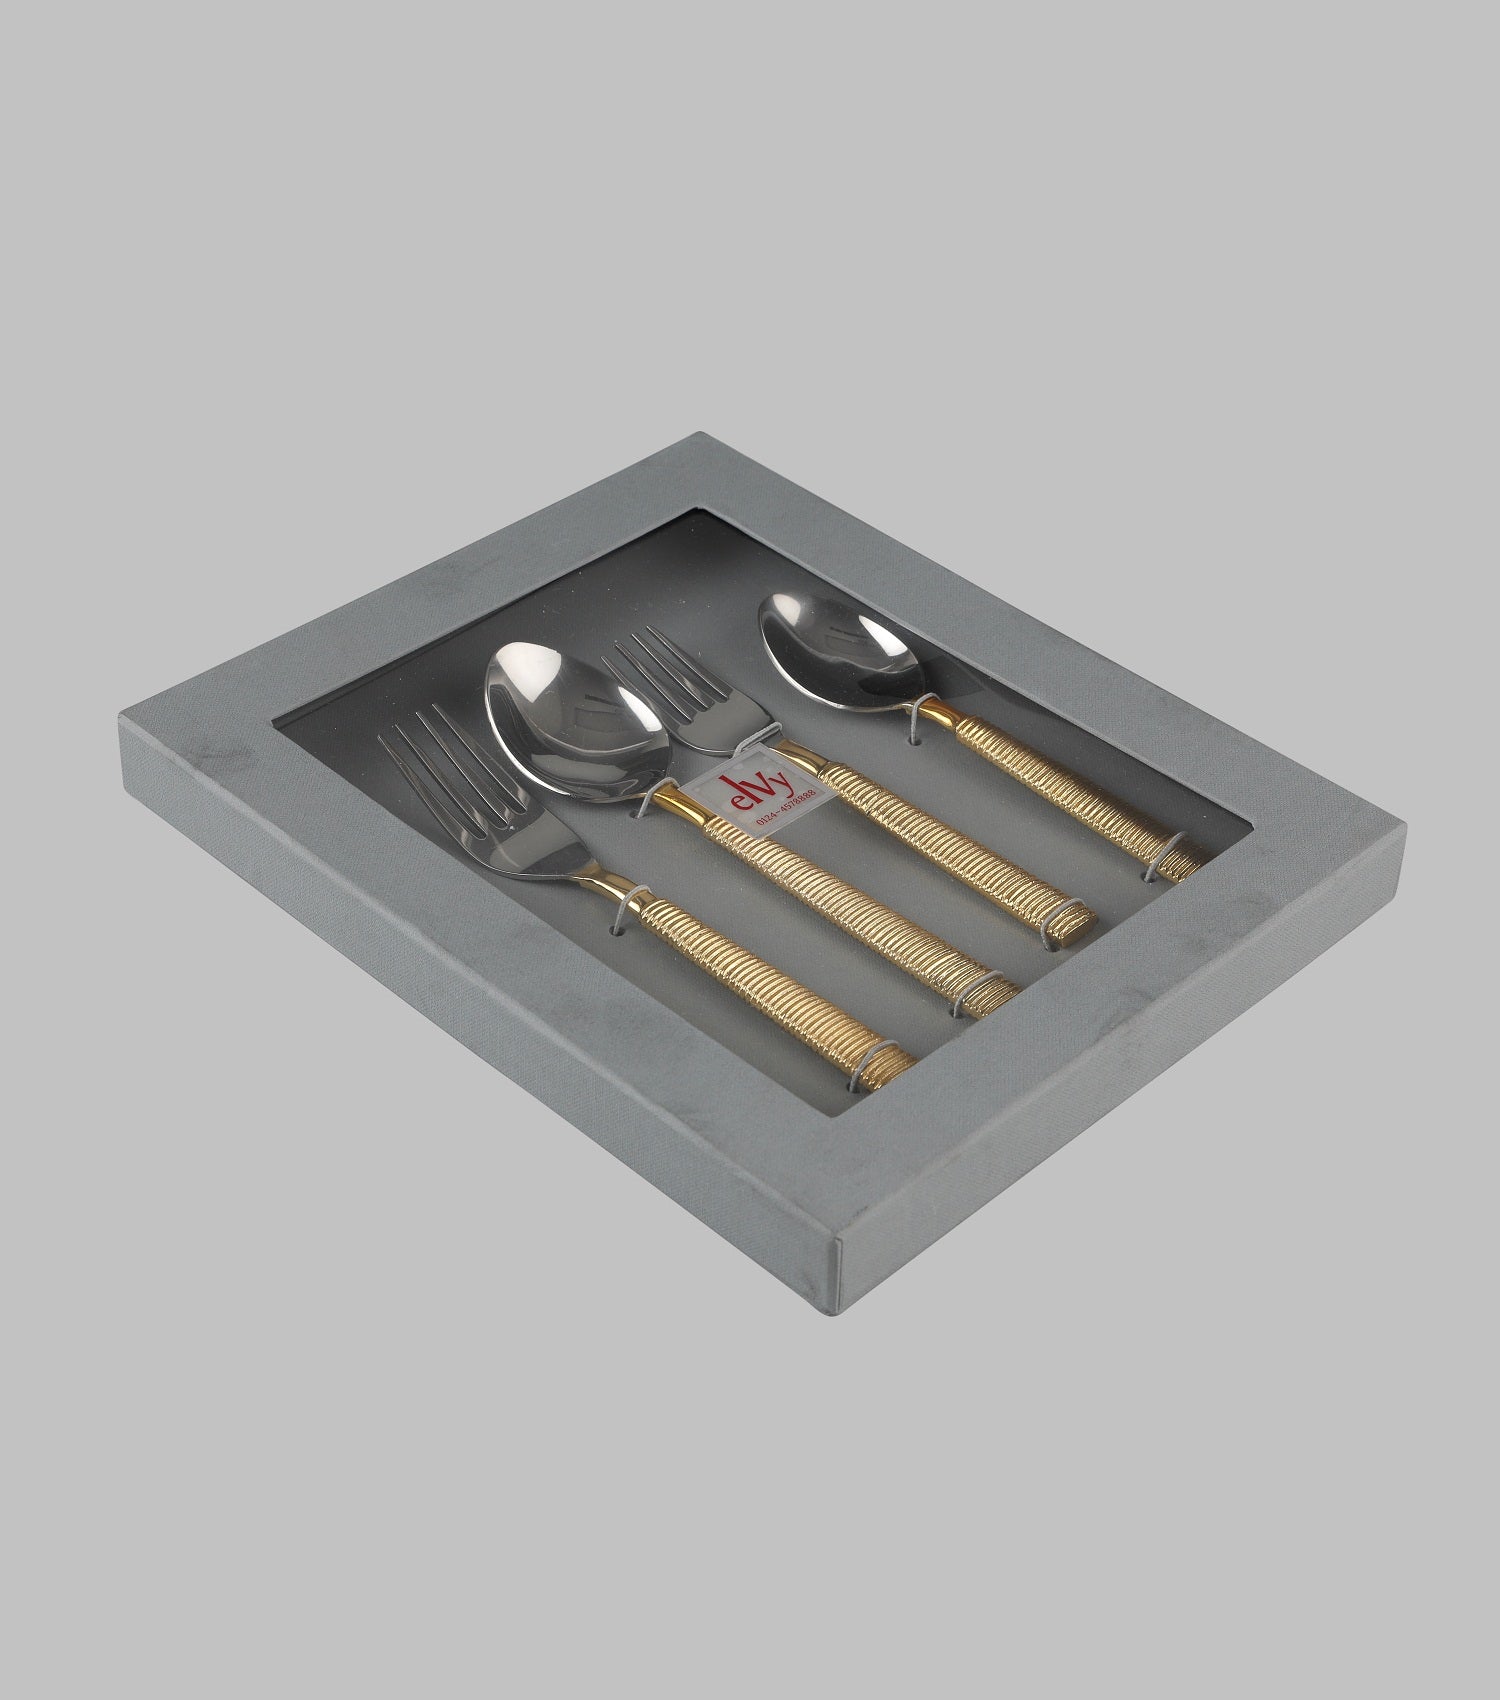 Gold Ribbed Cutlery Set of 5